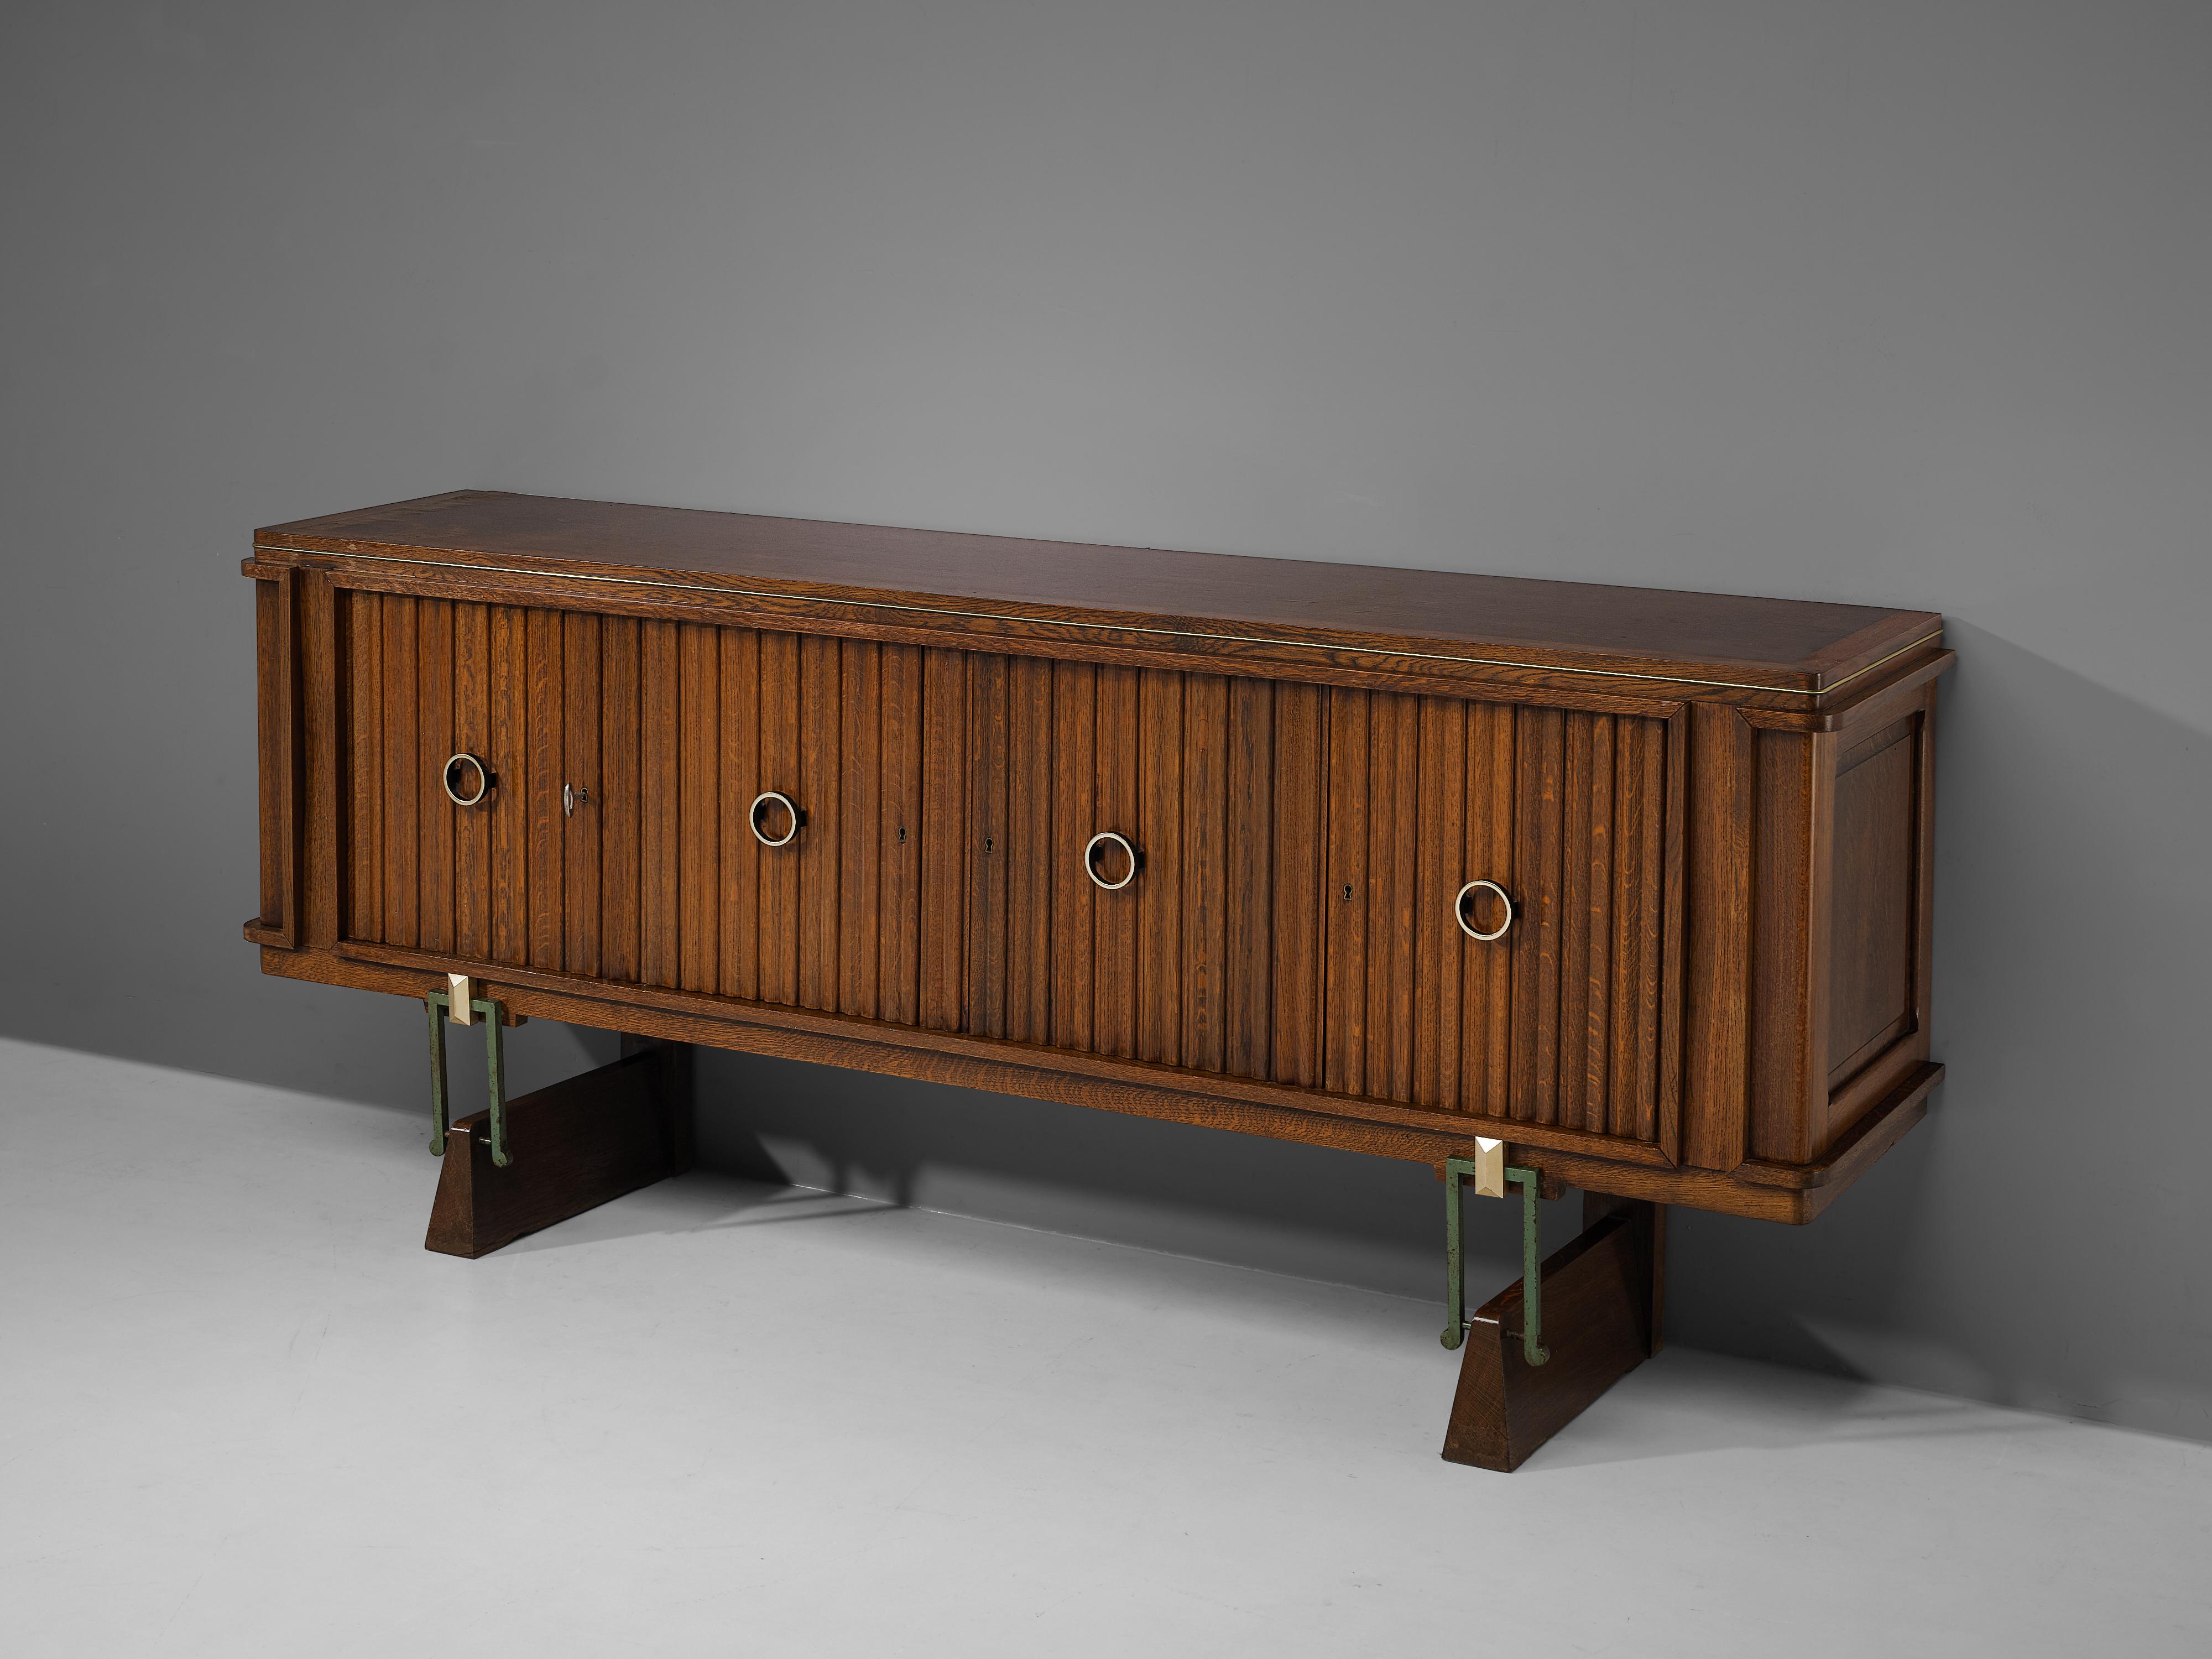 Mid-20th Century French Late Art Deco Sideboard in Solid Oak and Brass Details For Sale